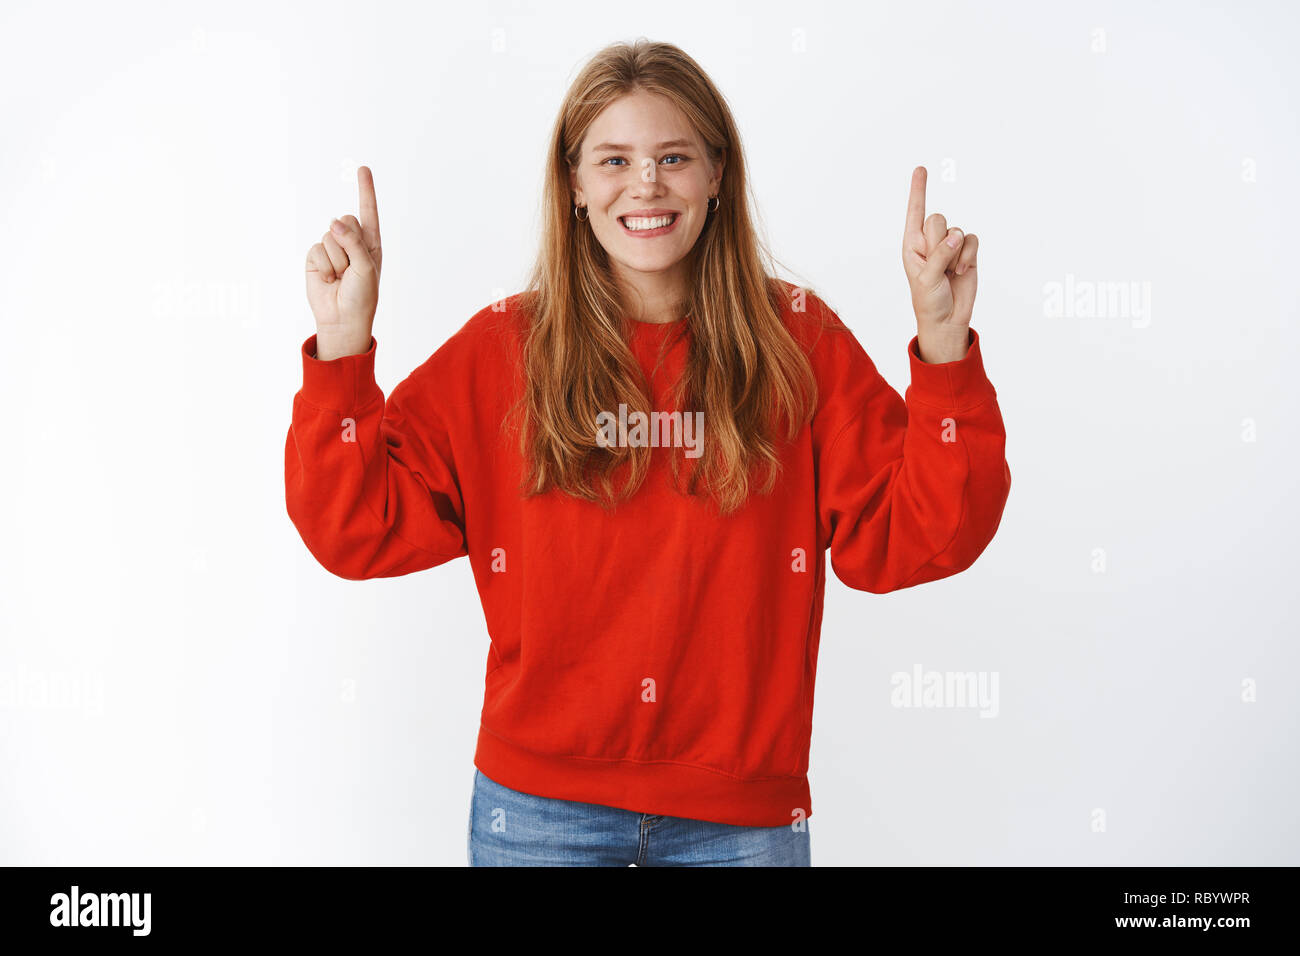 Charismatic charming optimistic young european girl with chubby cheeks, blue eyes and freckles smiling joyfully raising hands to point up at copy space posing in red stylish sweater over gray wall Stock Photo